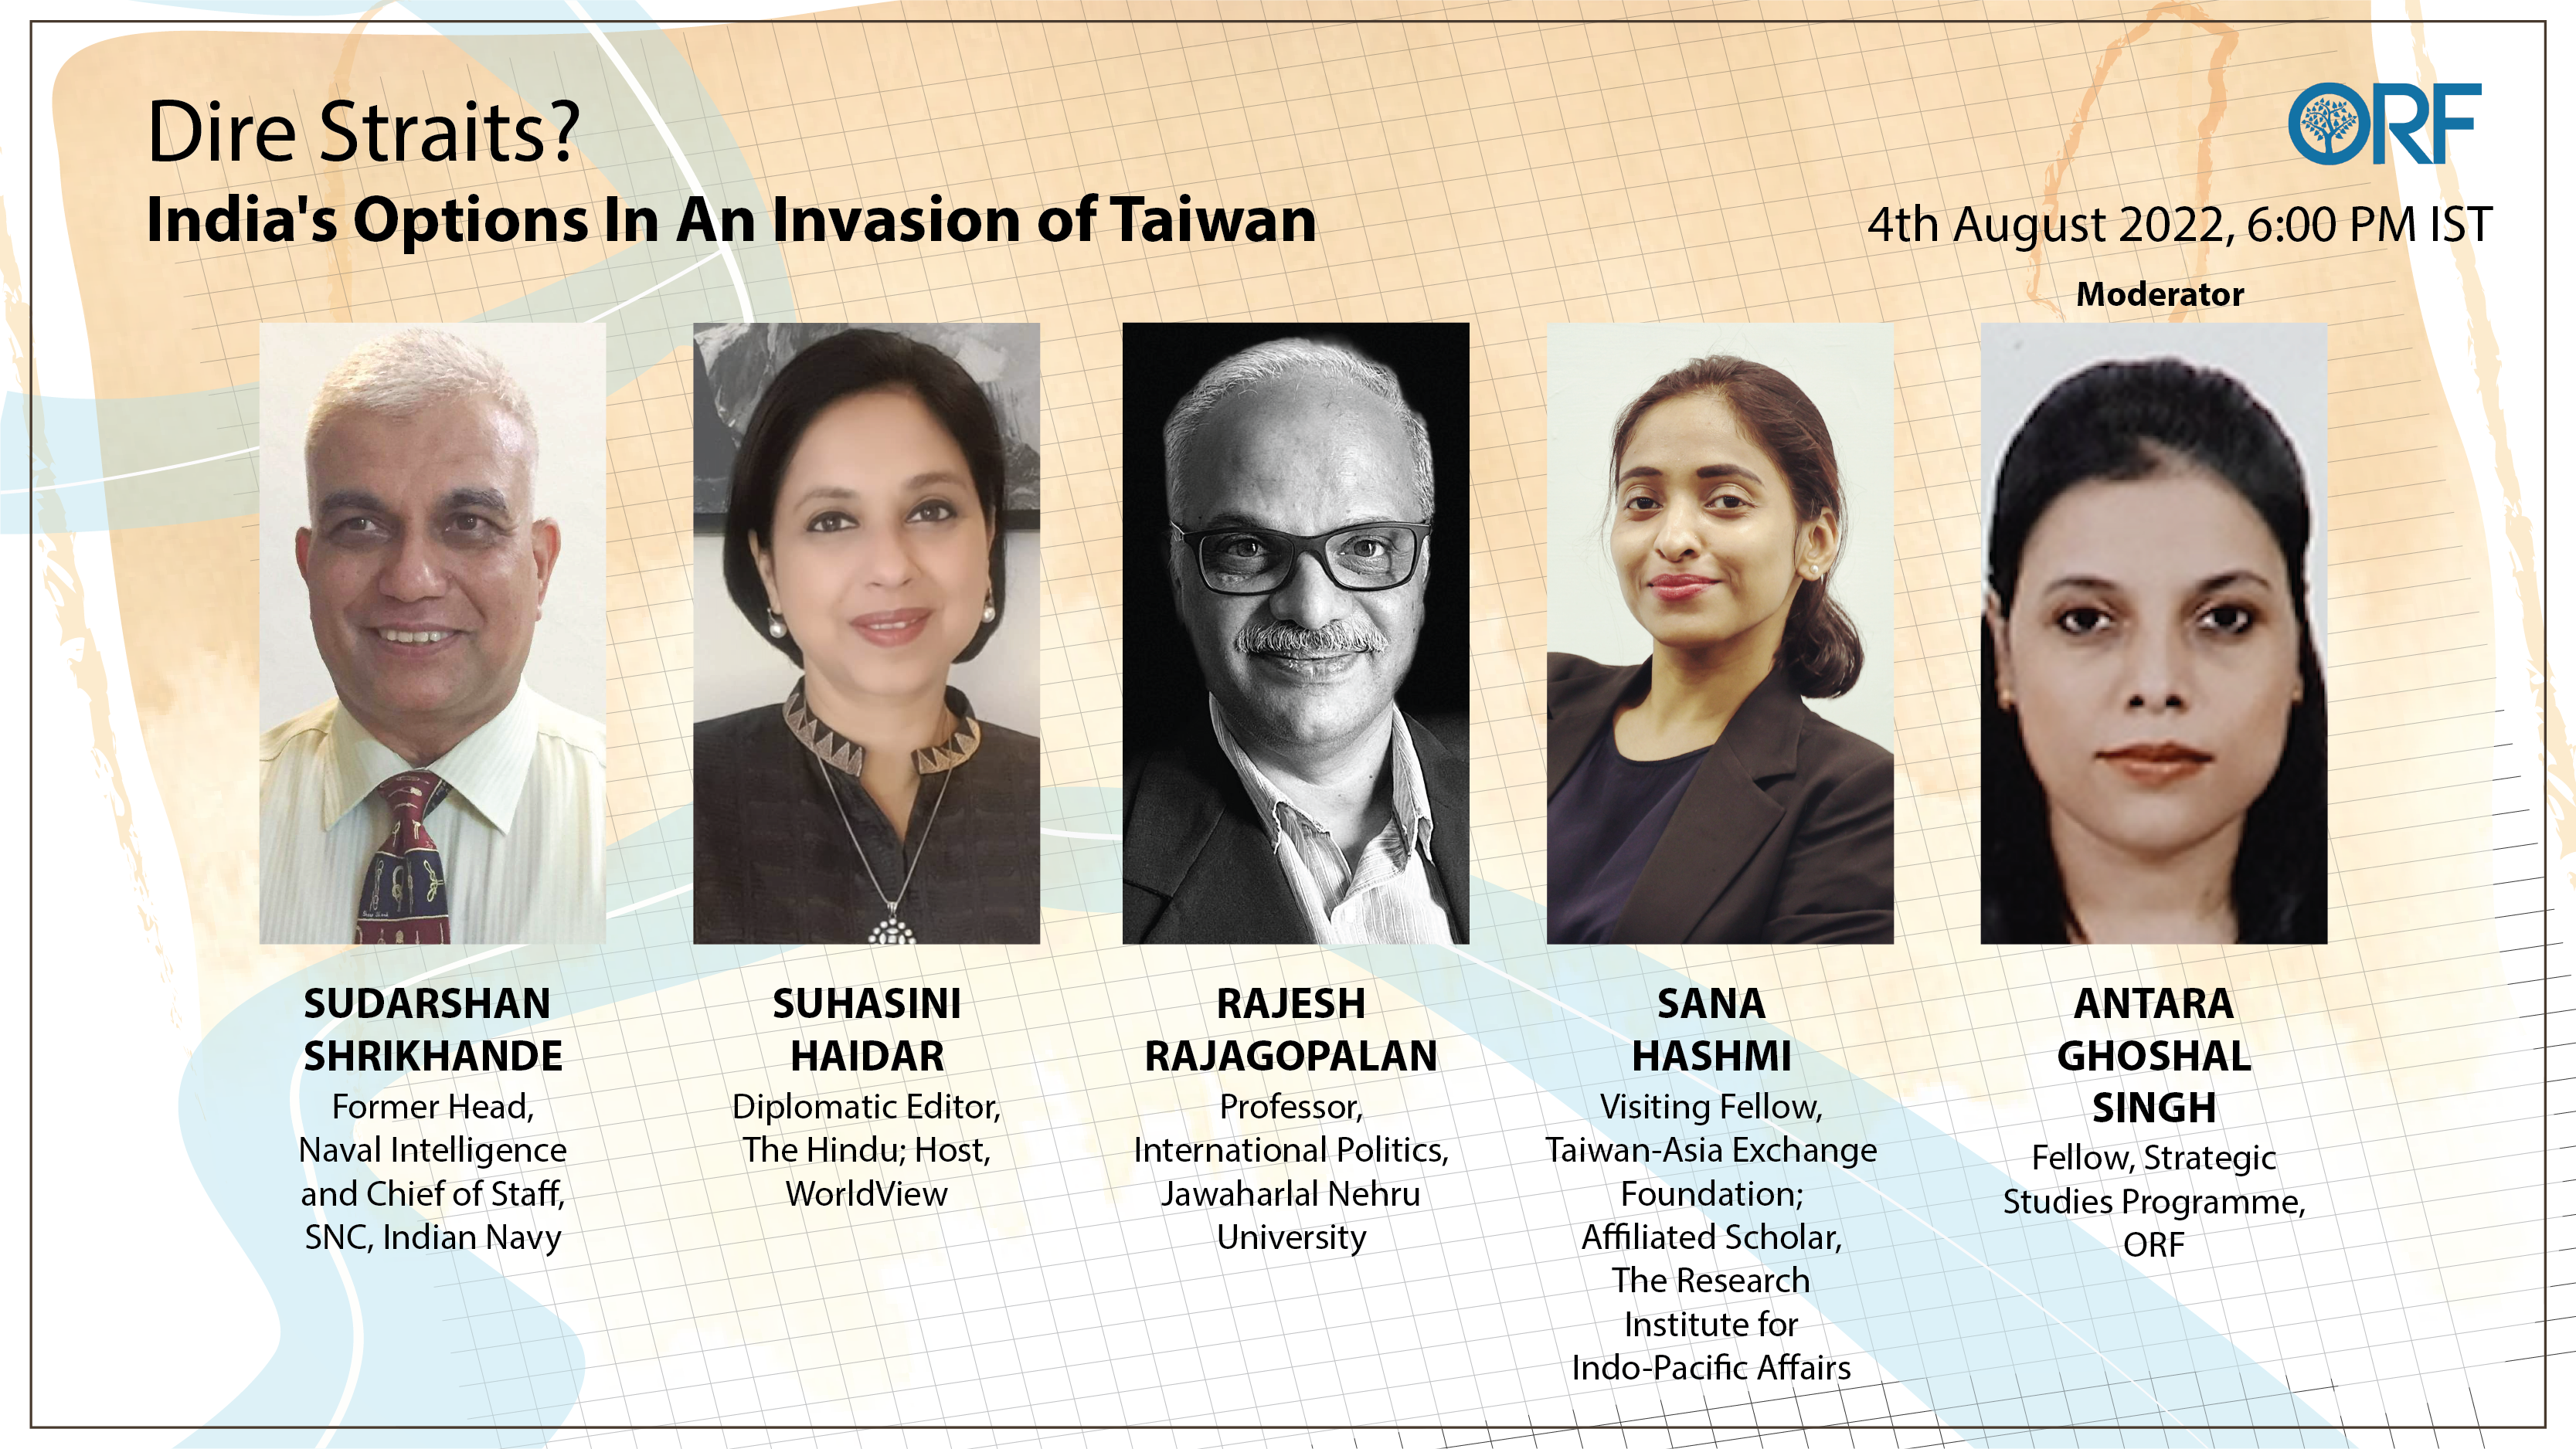 Dire Straits? India's Options In An Invasion of Taiwan